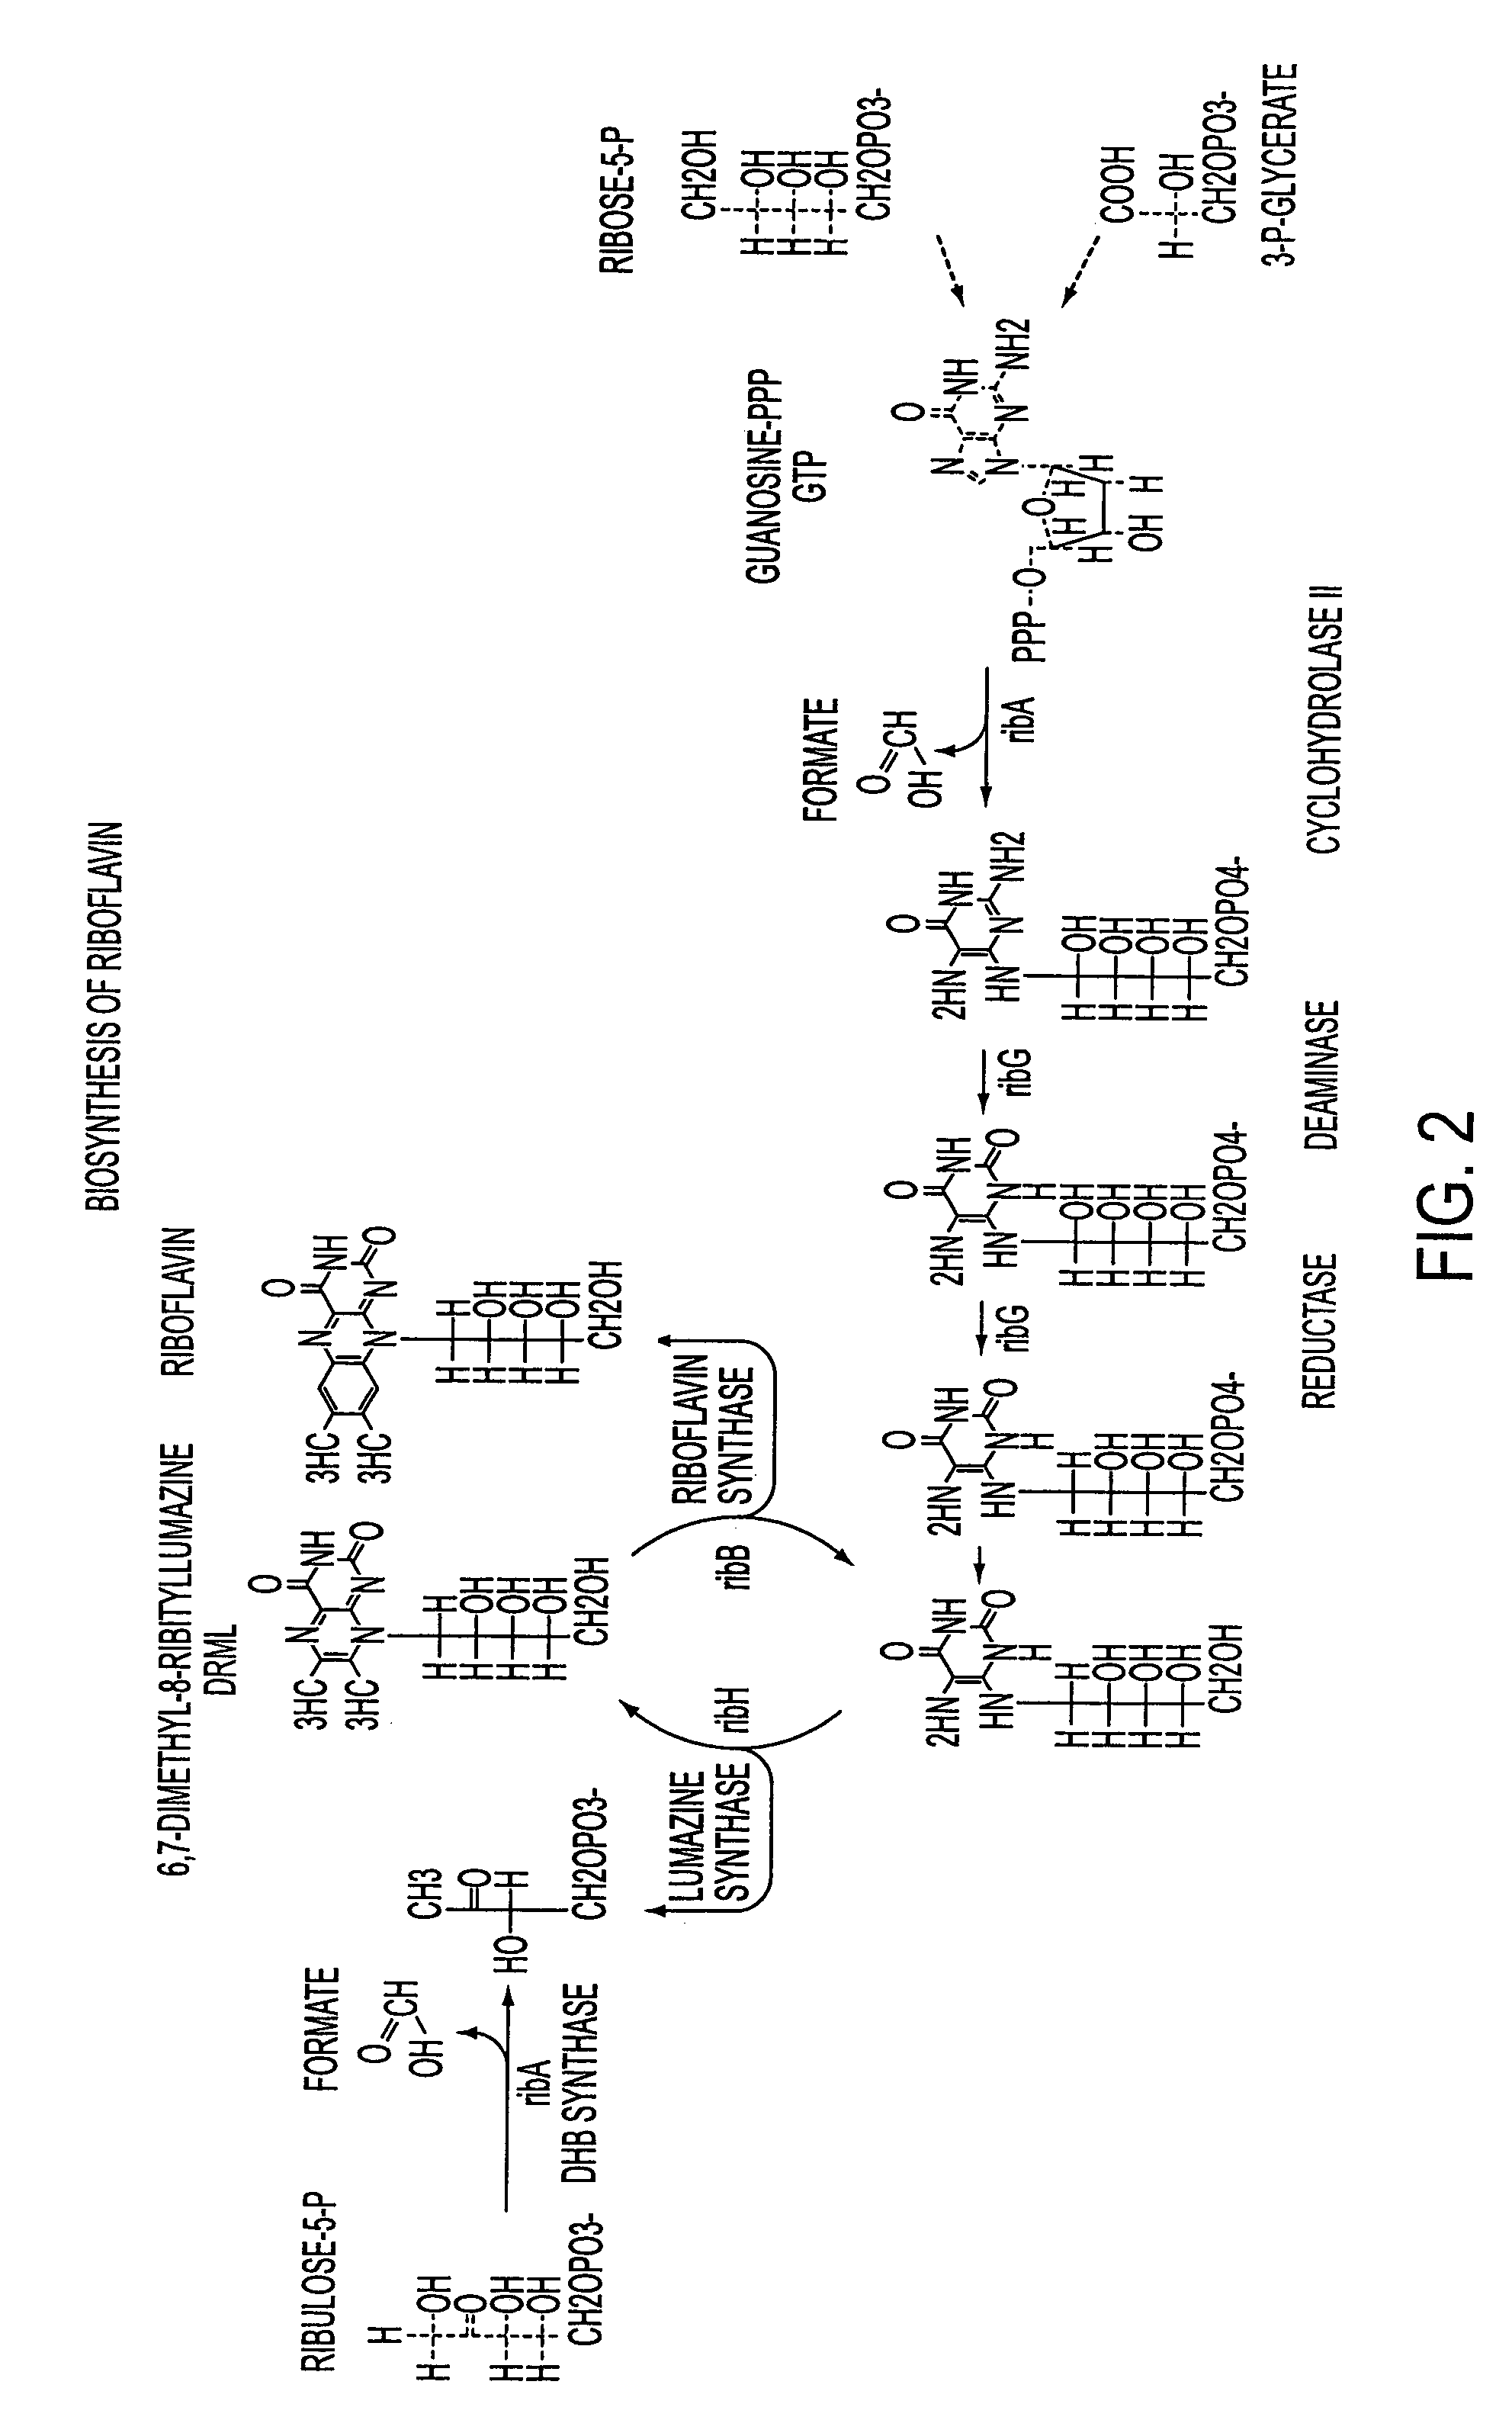 Process for producing a target fermentation product